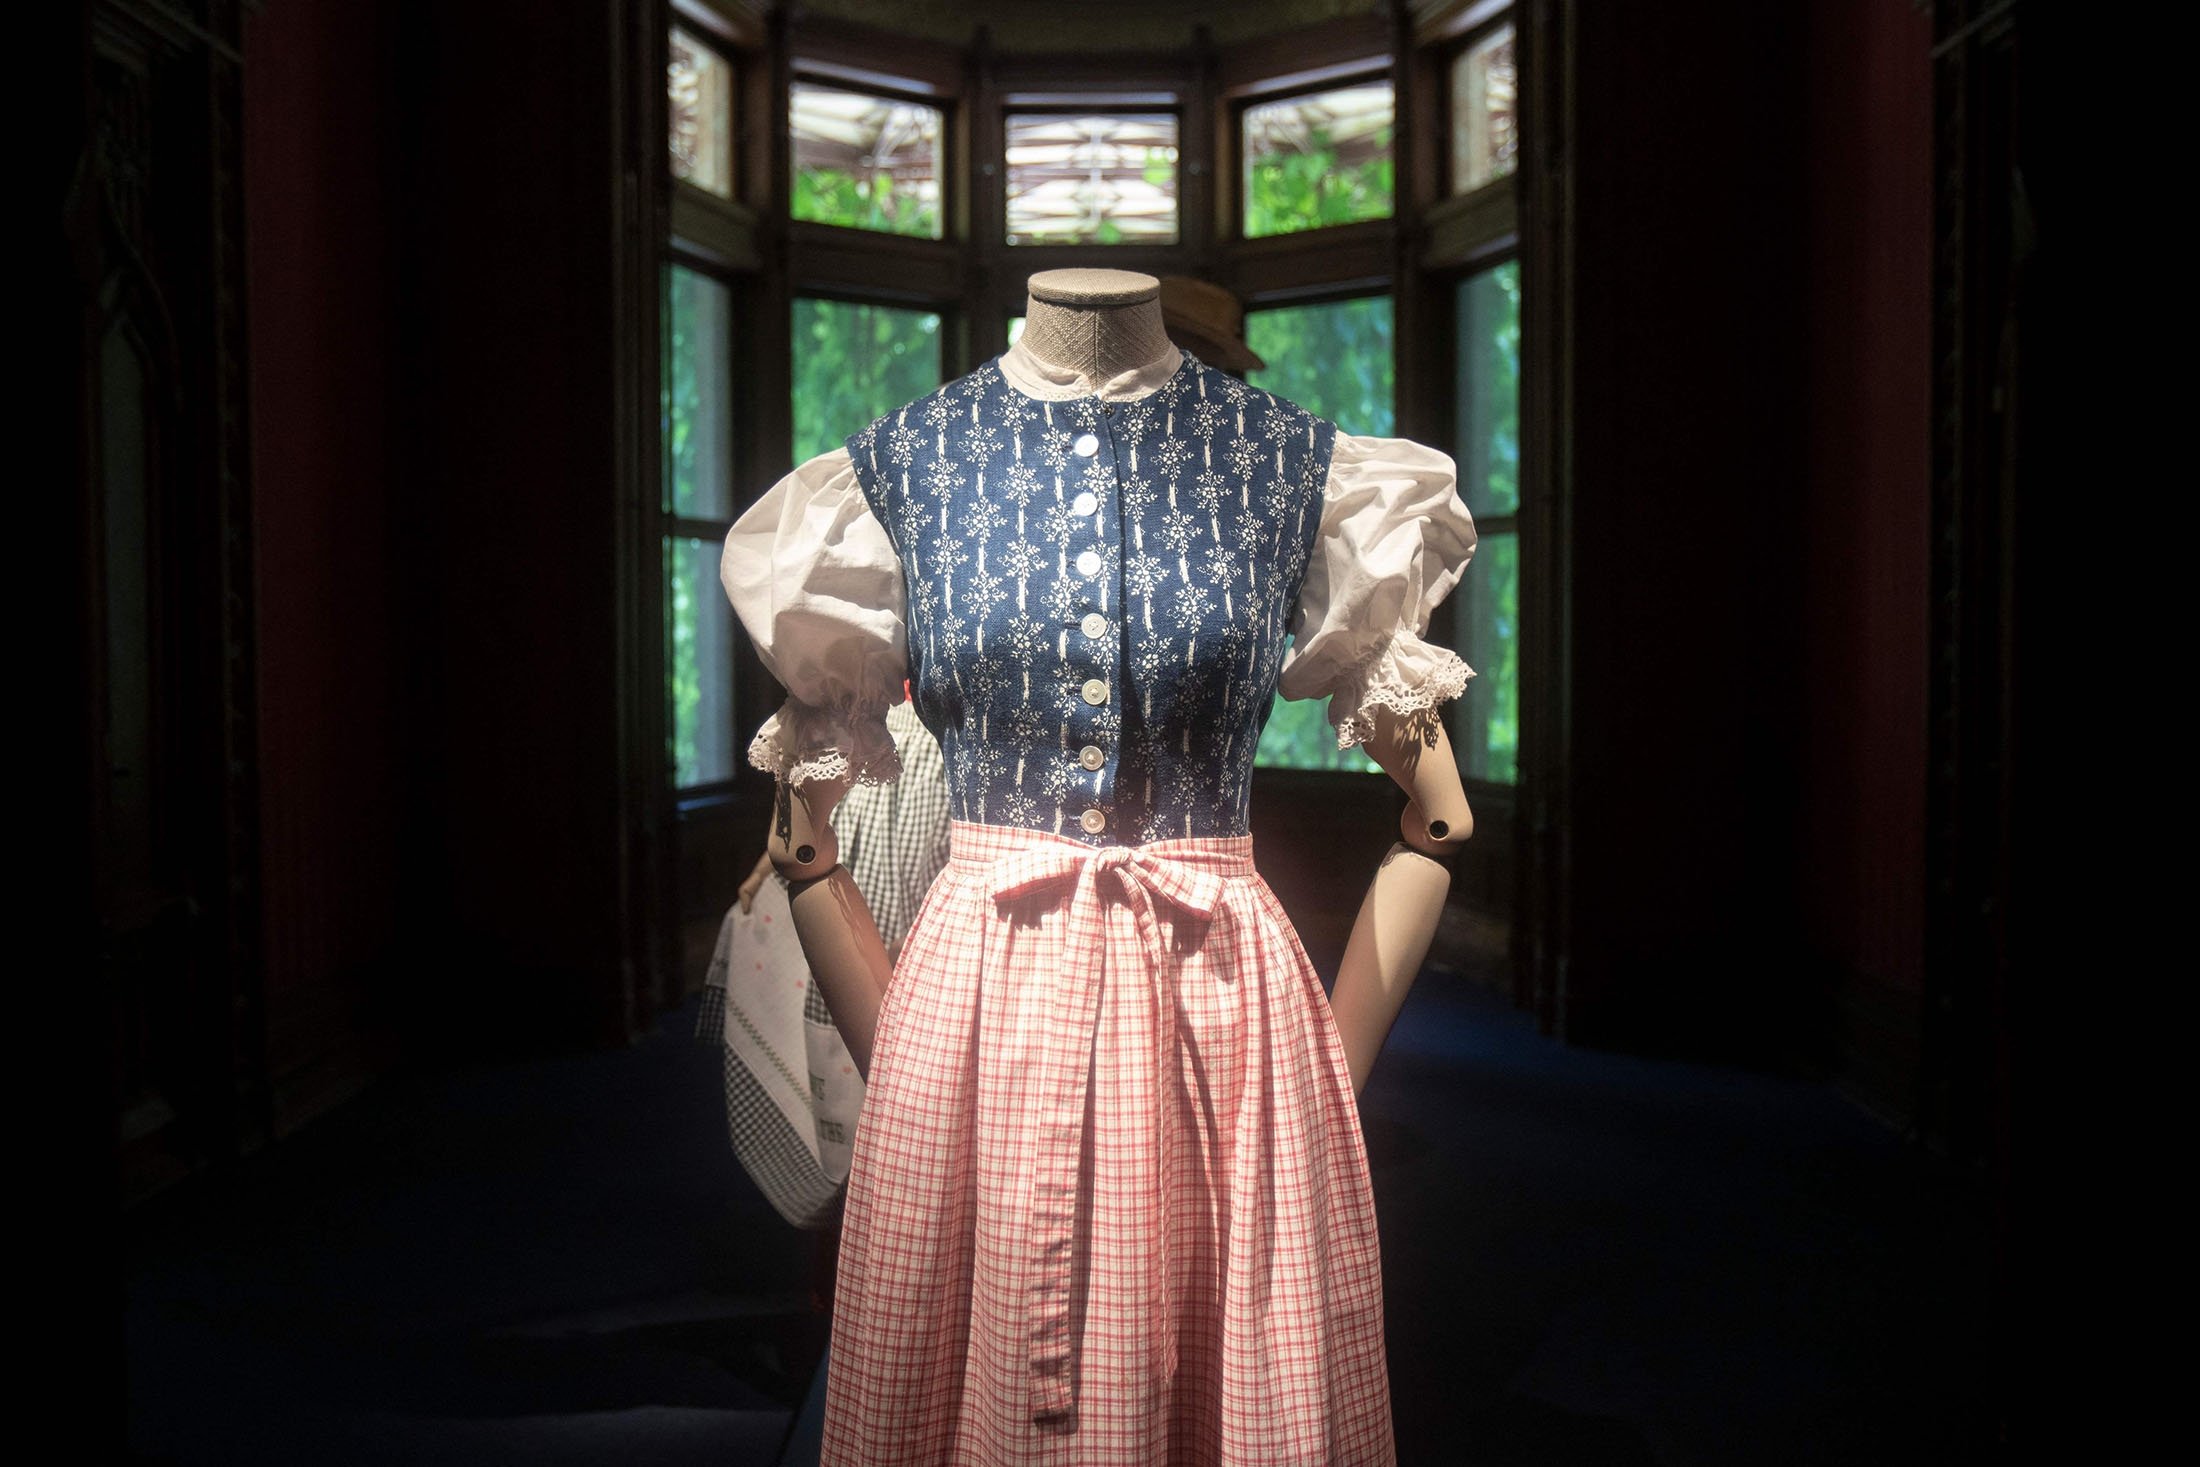 Dirndl dresses are on display at the exhibition 